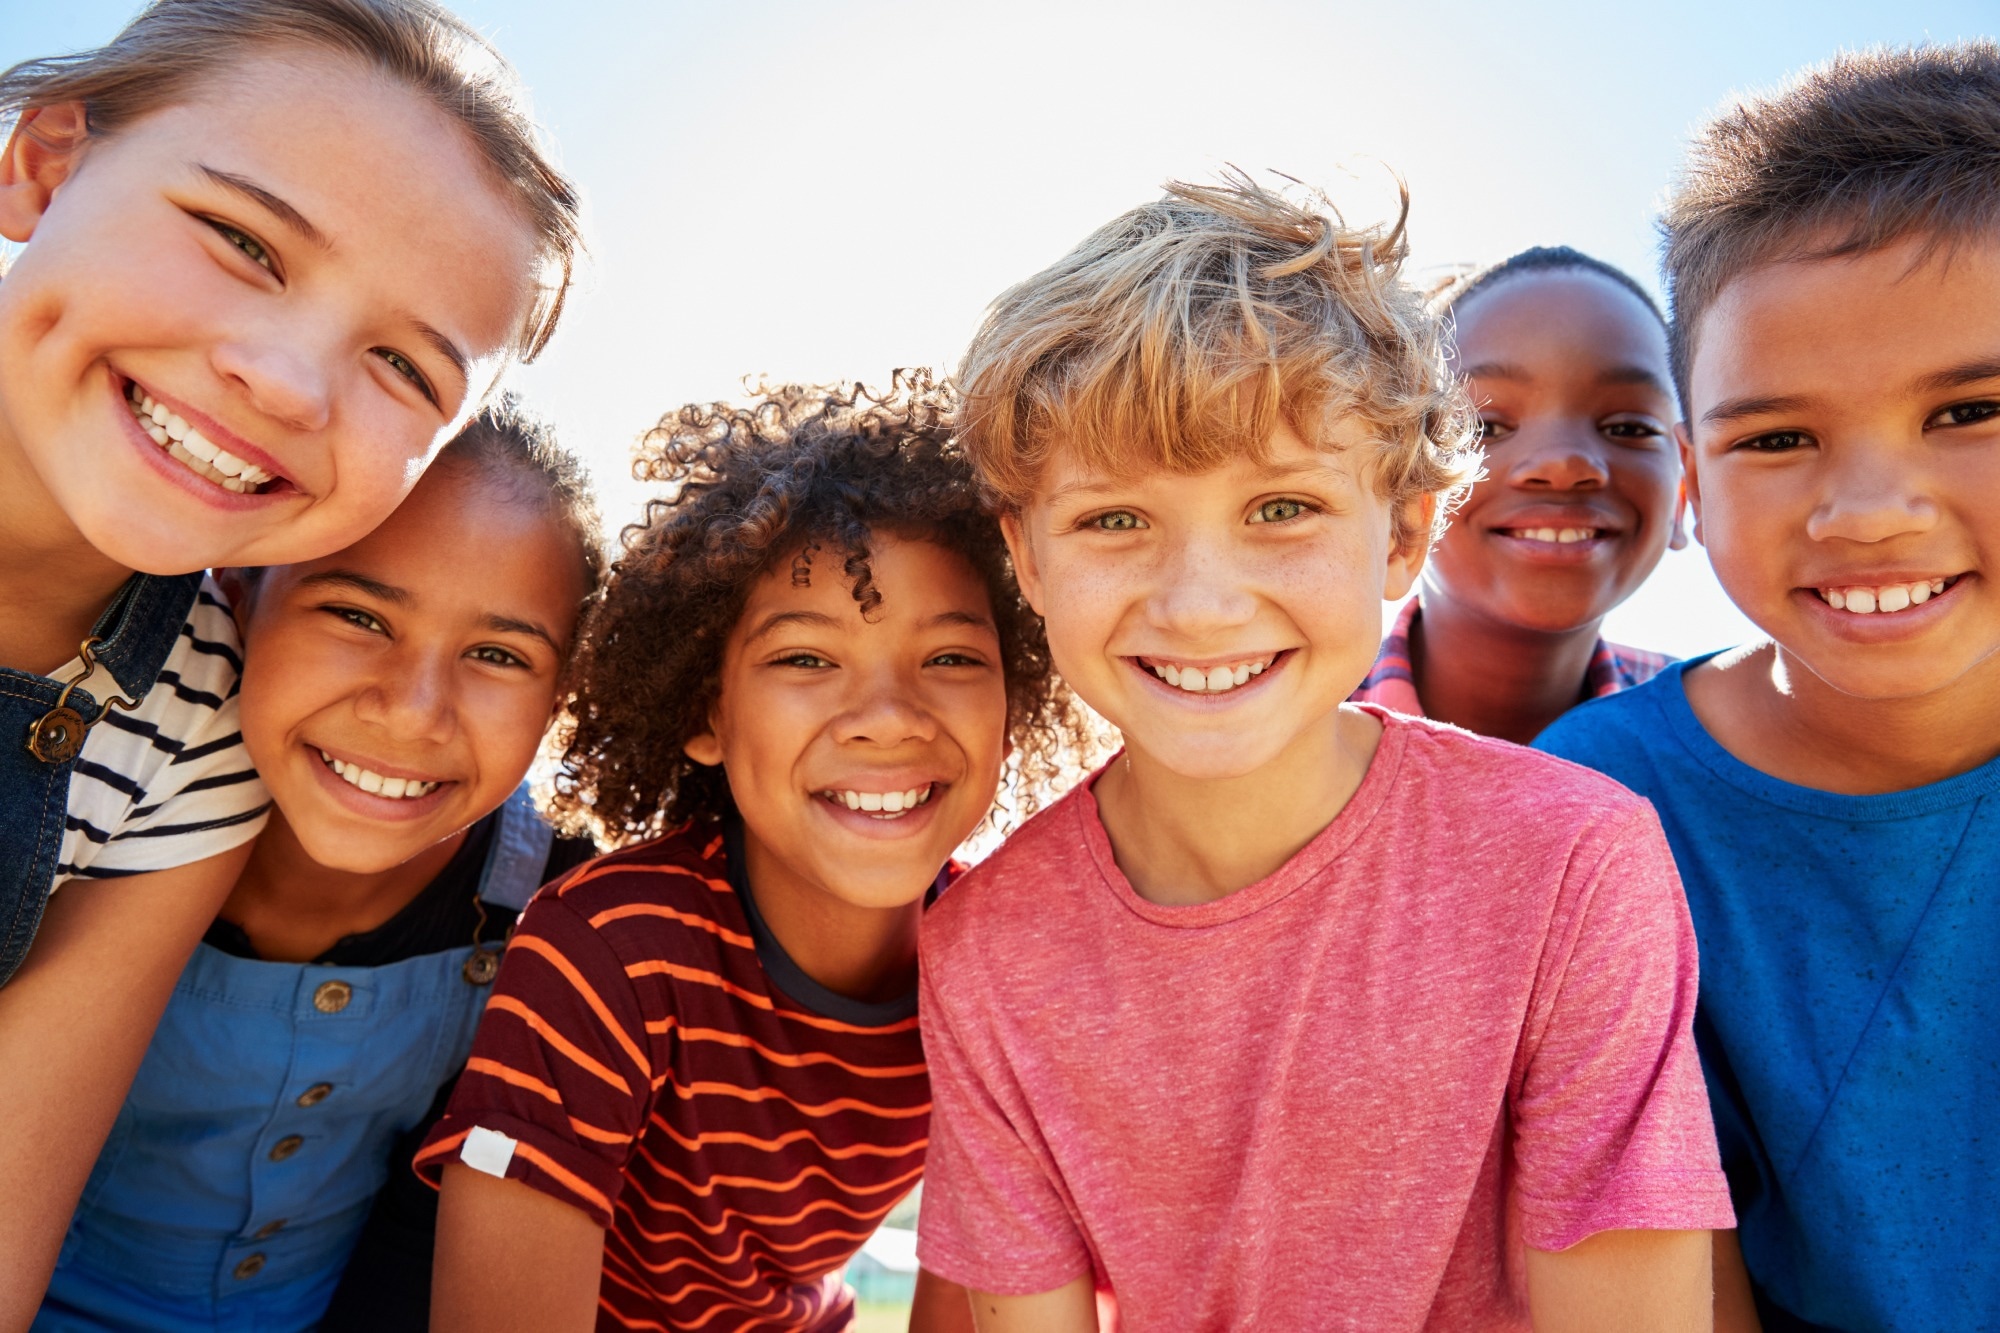 Study: Interventions to improve well-being among children and youth aged 6–17 years during the COVID-19 pandemic: a systematic review. Image Credit: Monkey Business Images / Shutterstock.com